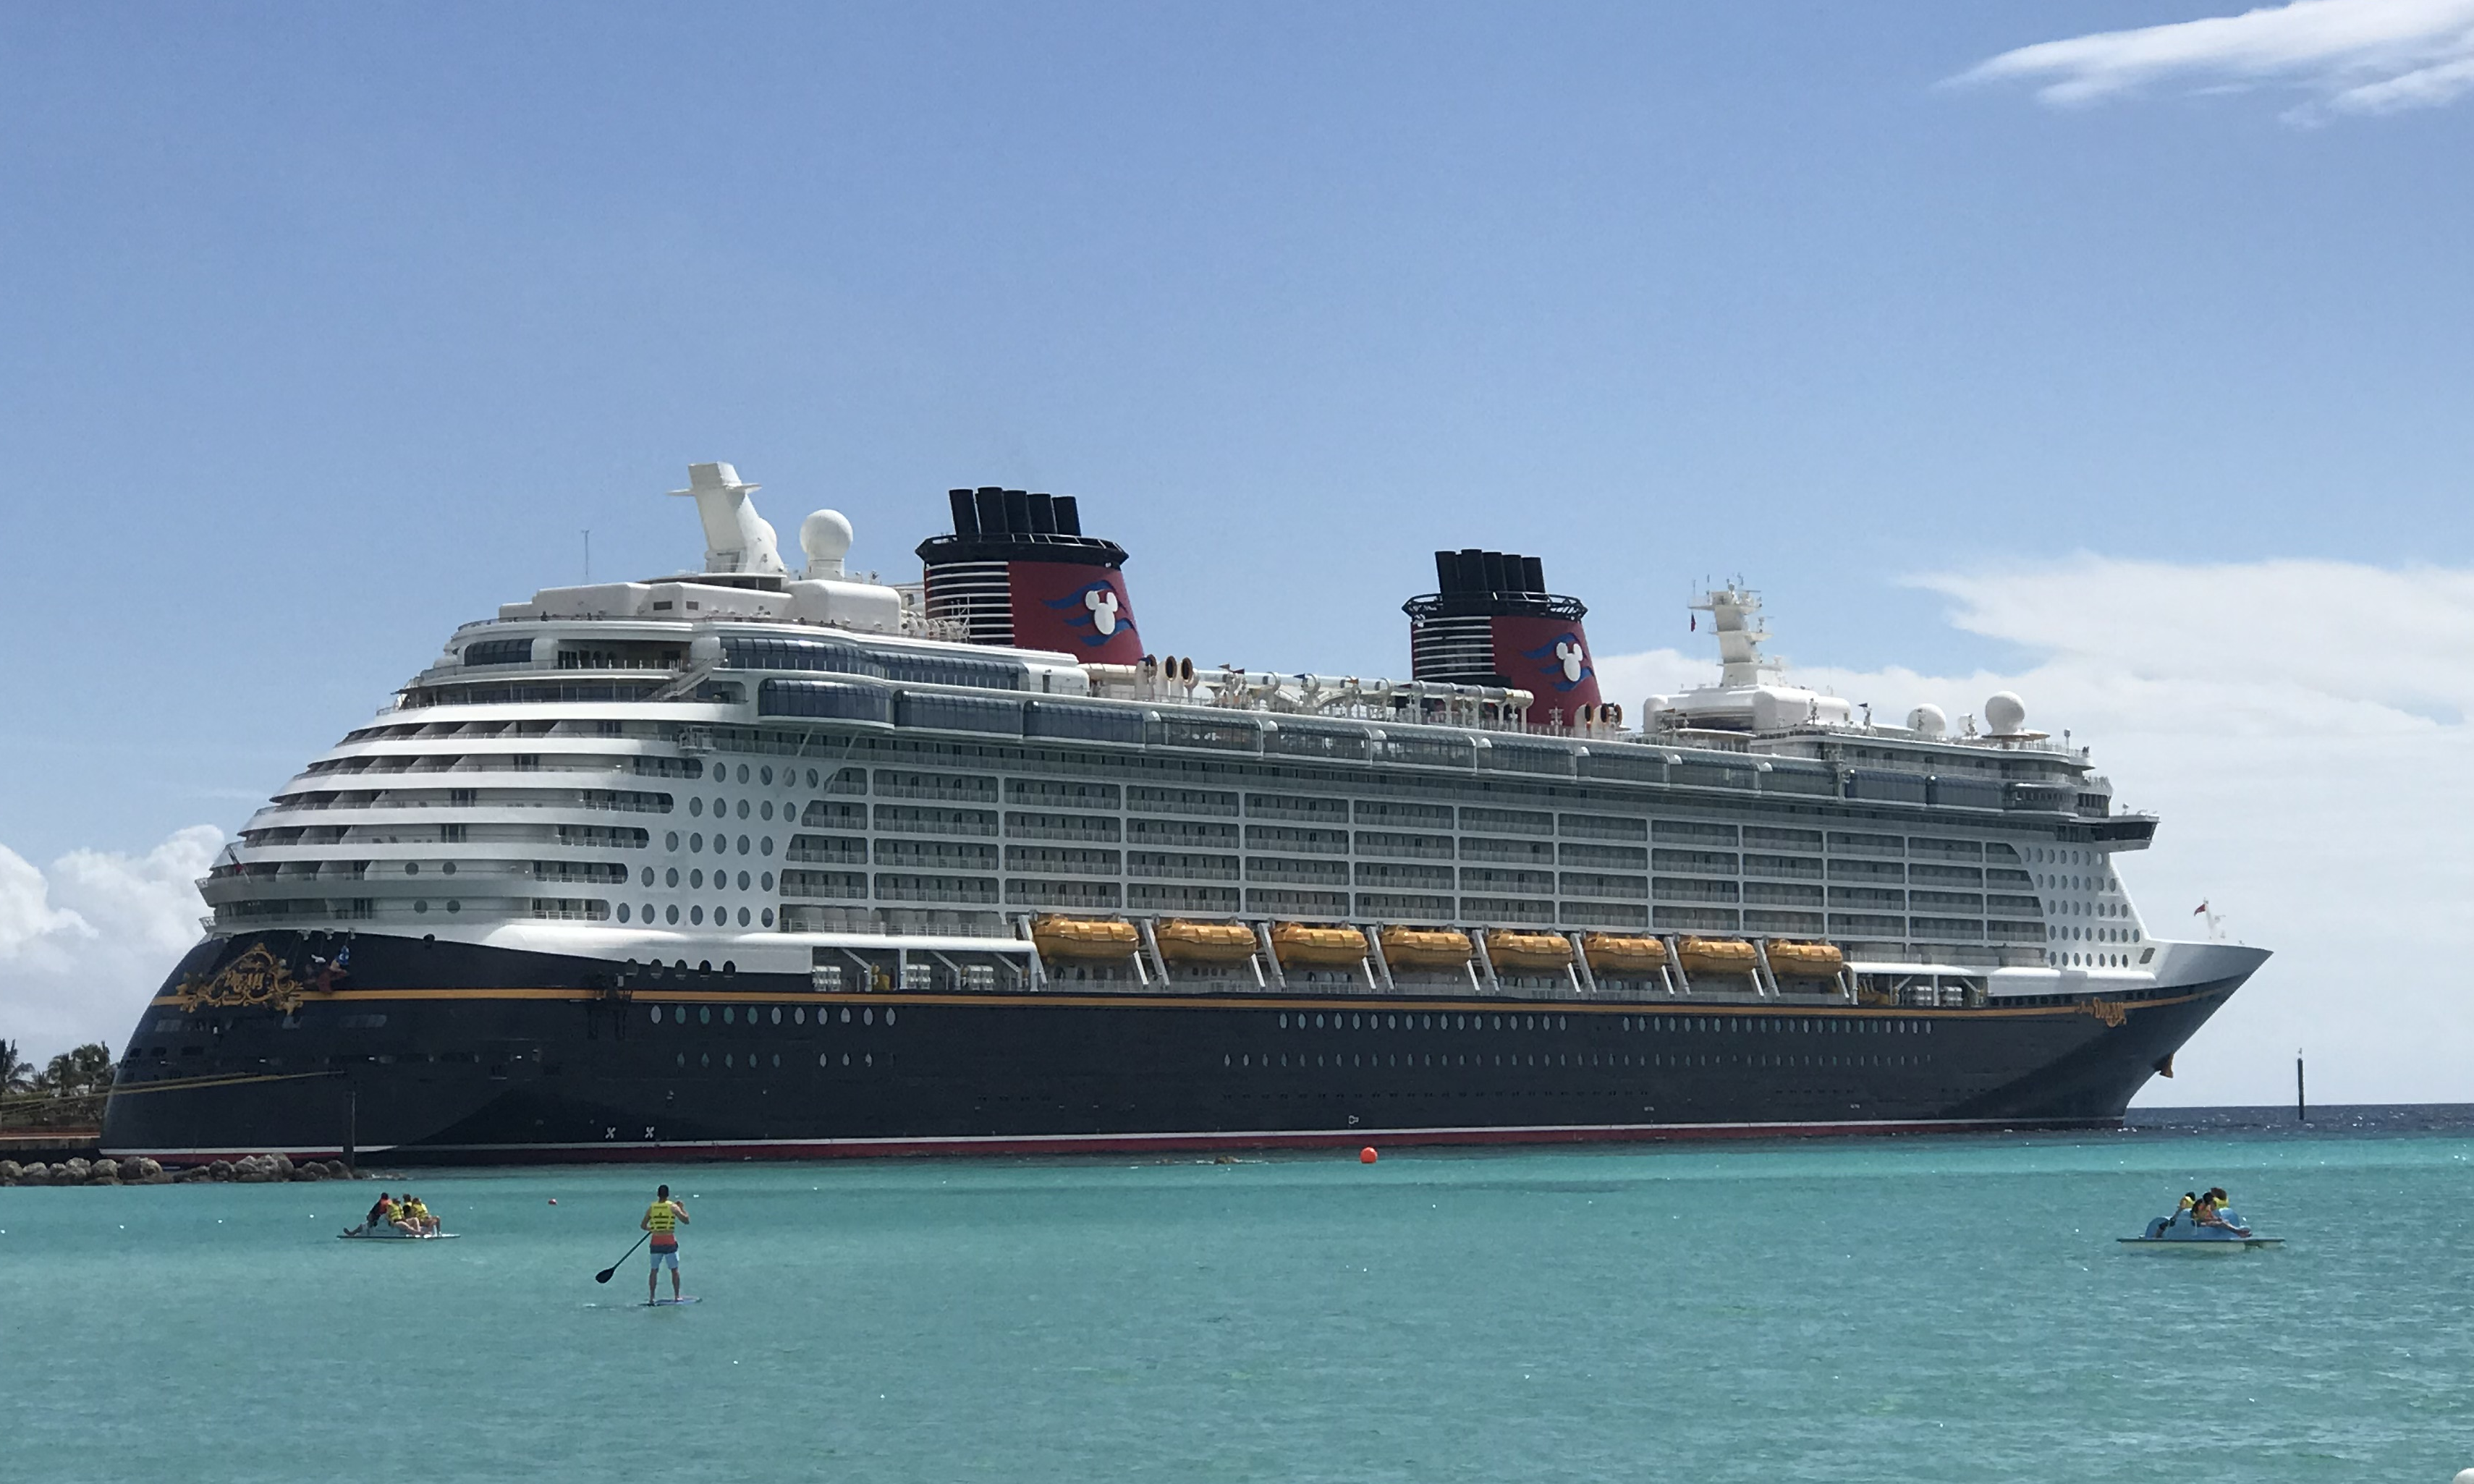 Disney Cruise Line Allowing Guests to Reschedule Cruises due to Coronavirus Concerns